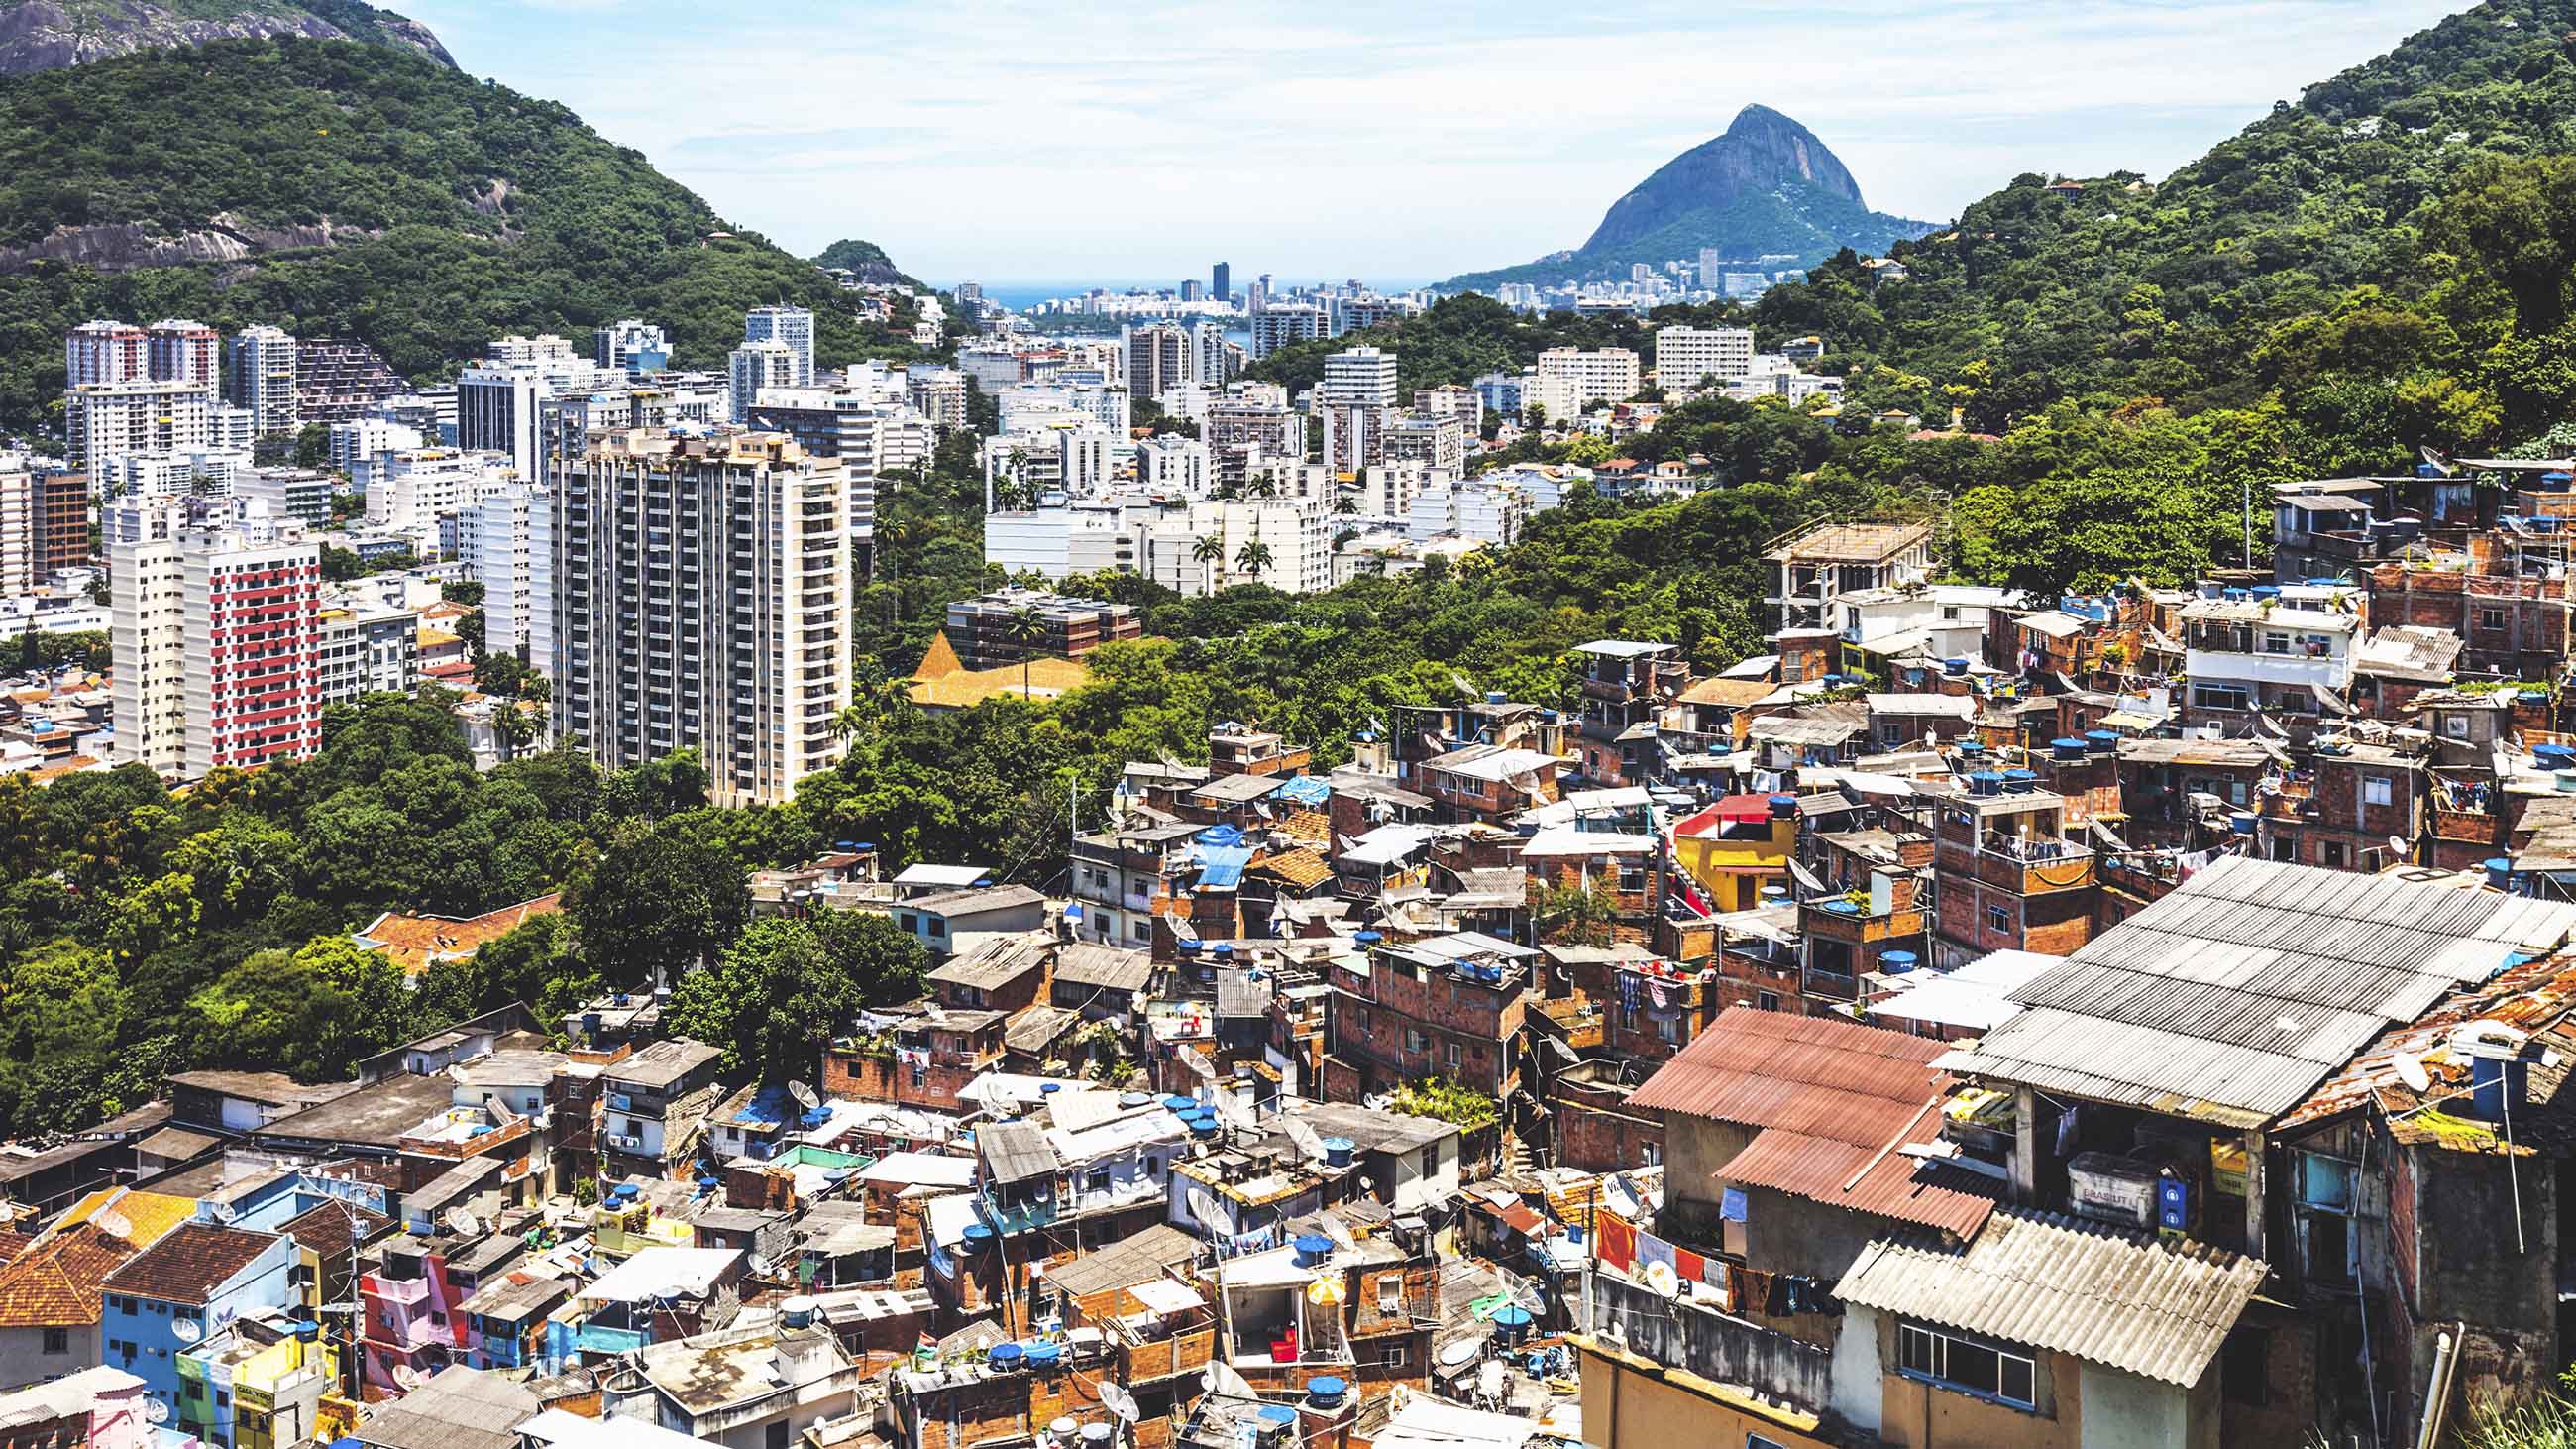 Brazil has one of the highest homicide rates in the world. How does that affect birth outcomes?